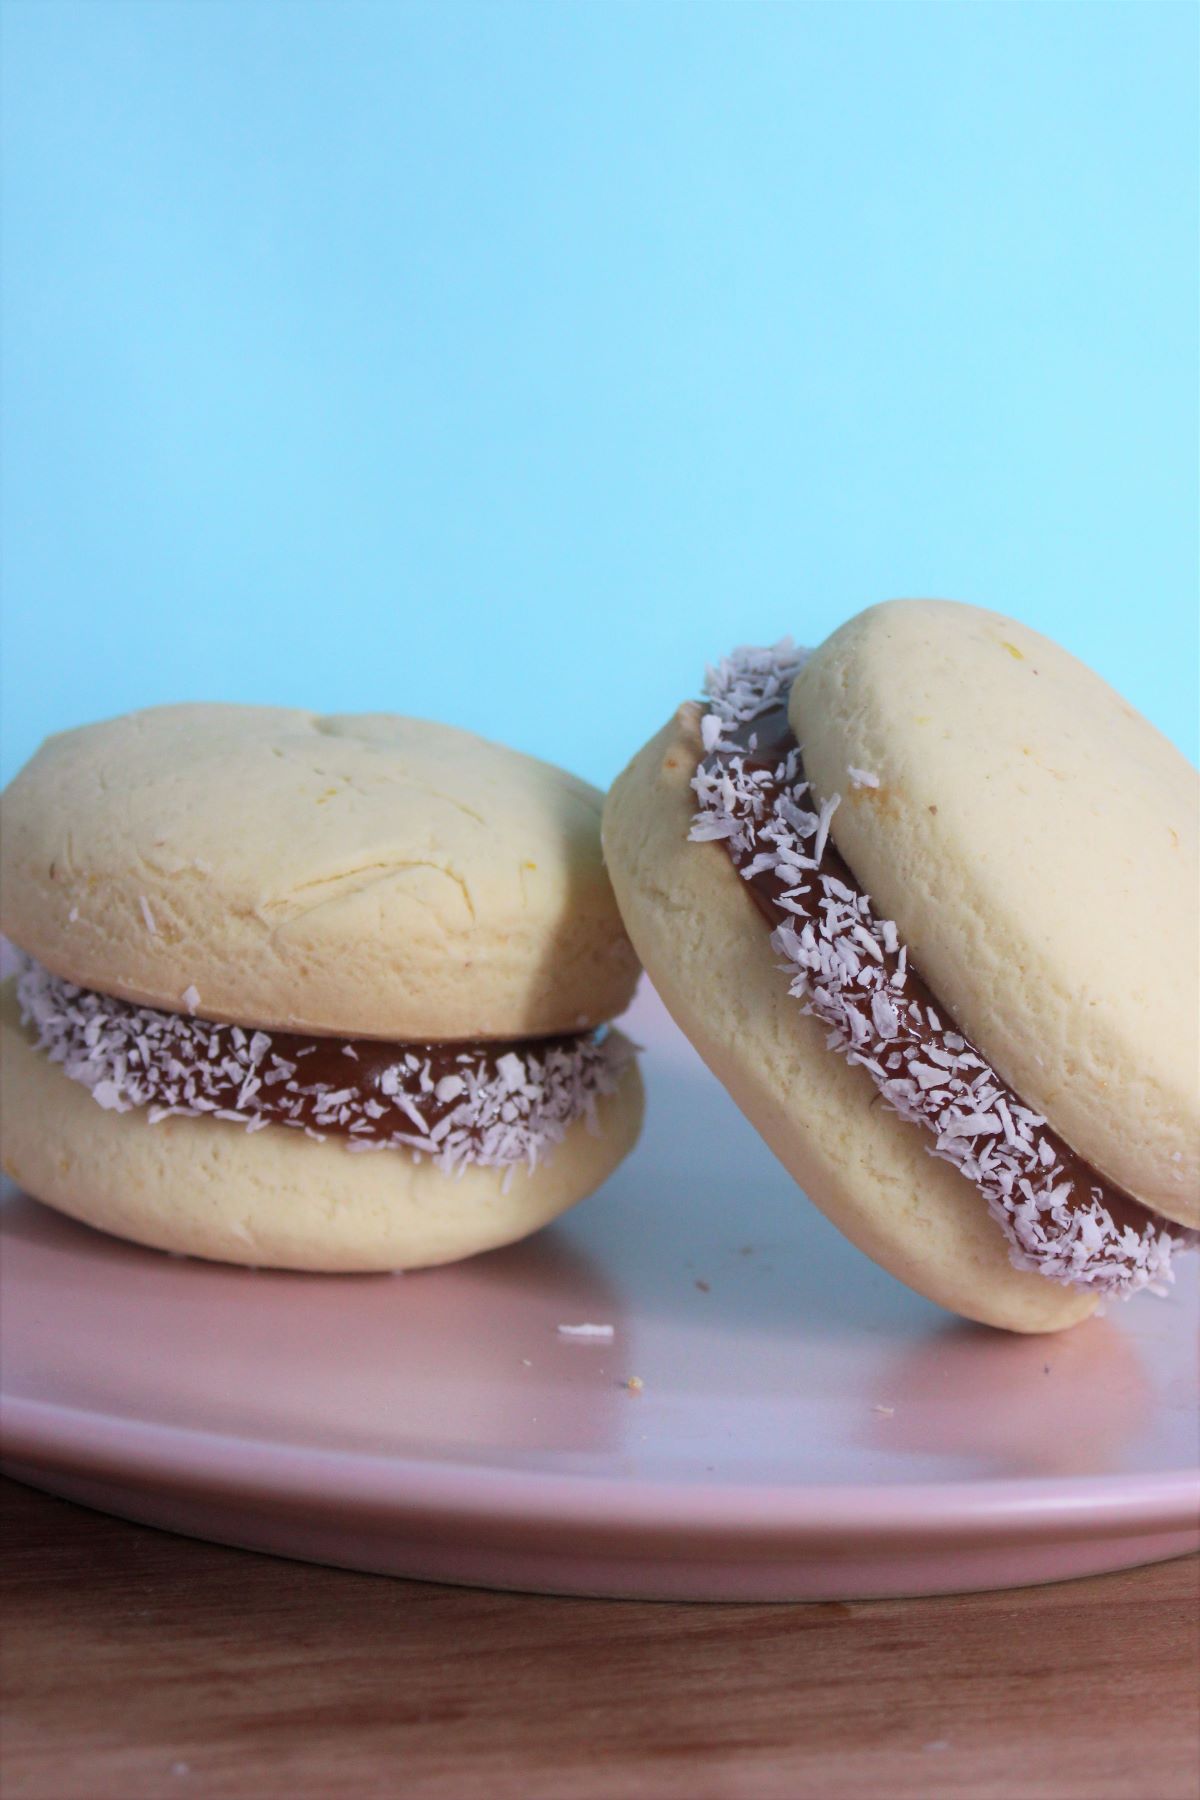 Two "alfajores" with dulce de leche on a pink plate. Ligh blue background.